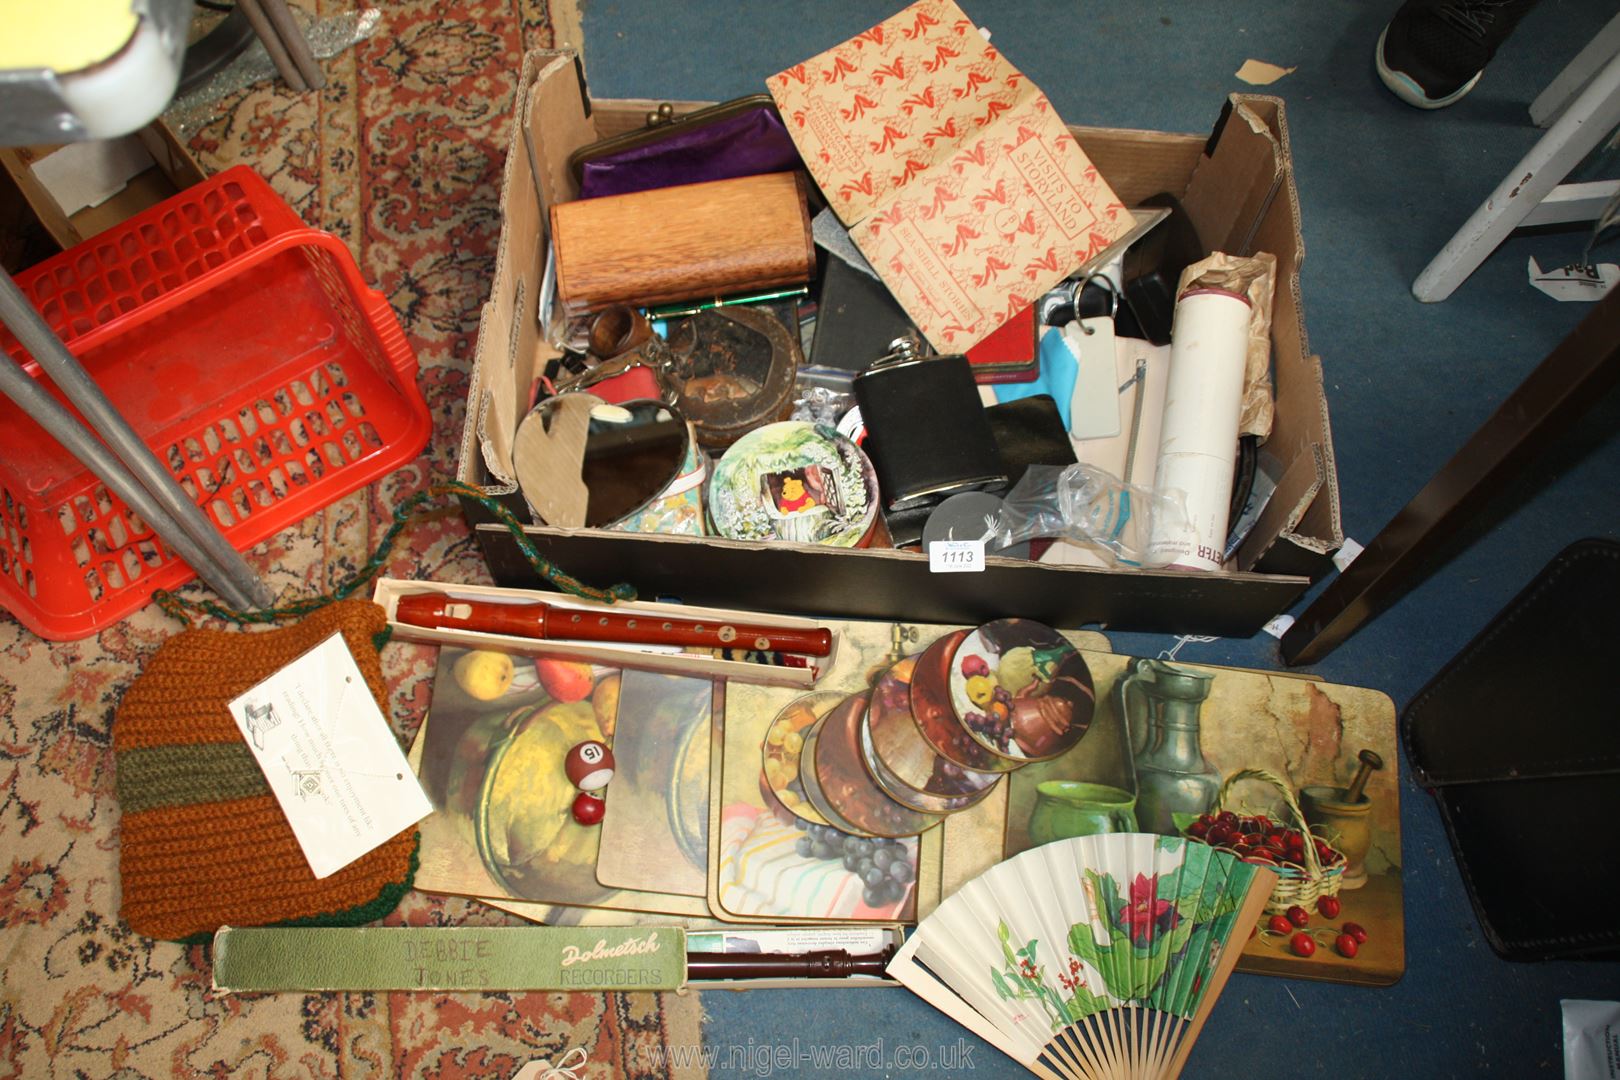 A box of miscellanea including recorders, leather wallet, wooden pencil box, small torches,